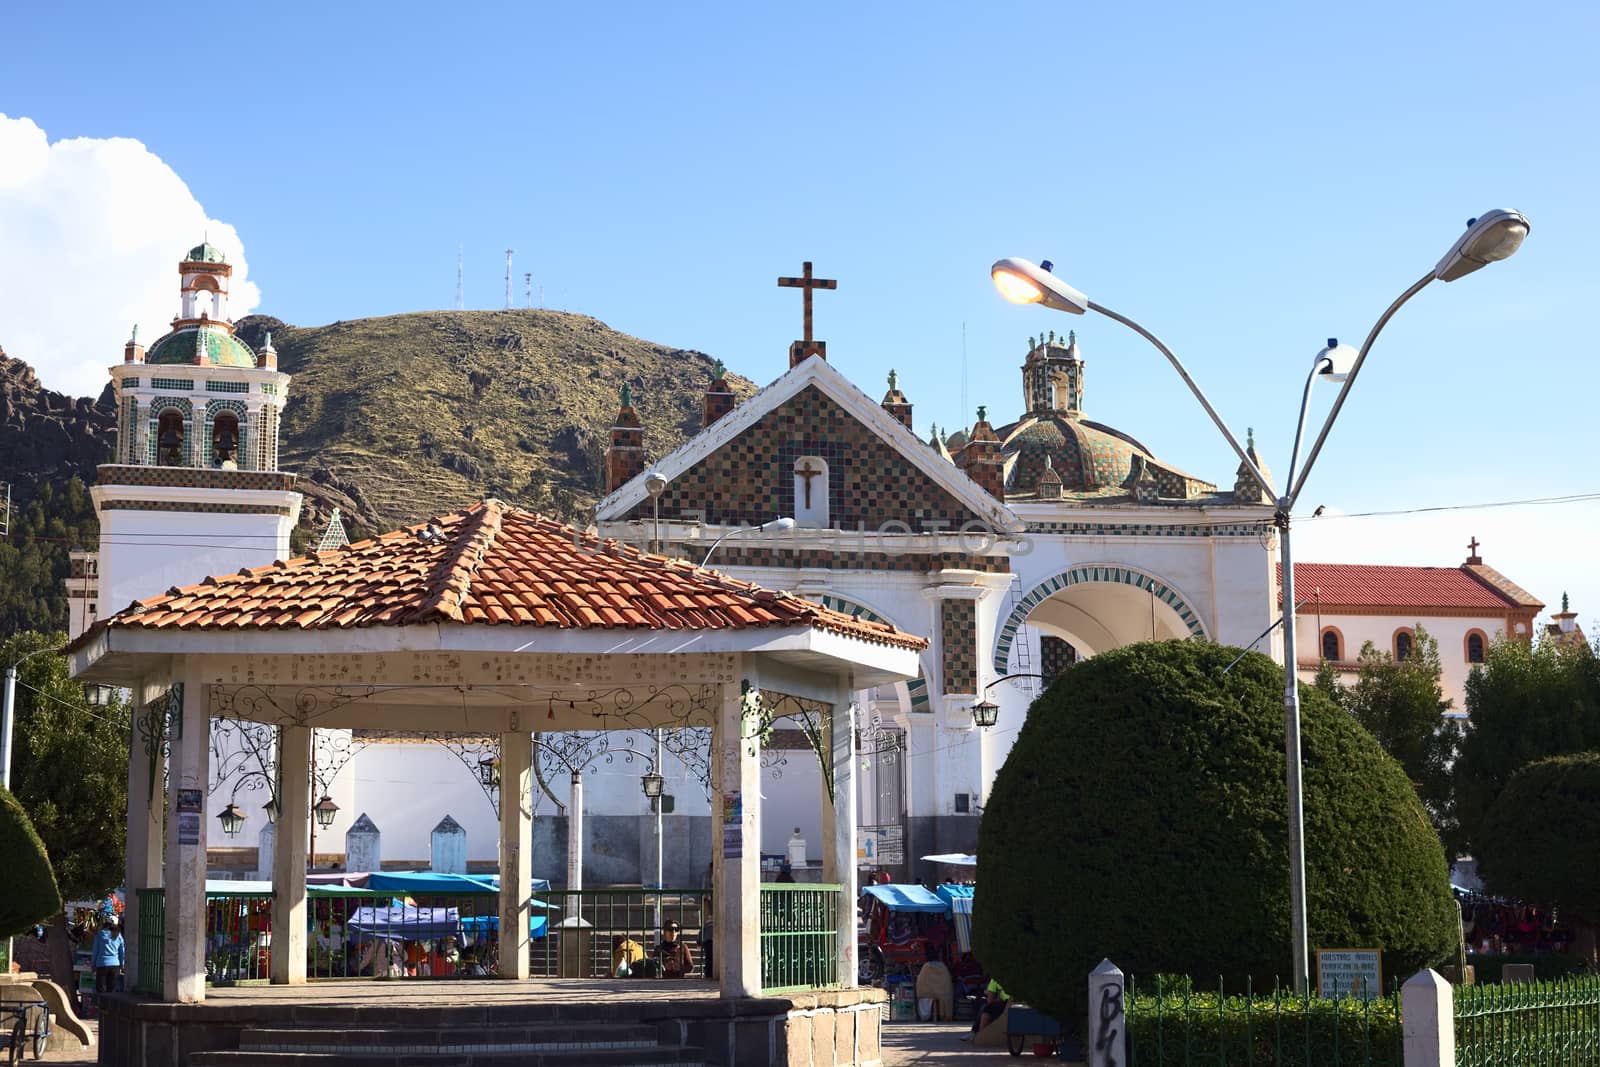 COPACABANA, BOLIVIA - OCTOBER 19, 2014: Pavillon on the Plaza 2 de Febrero (main square) wih the Basilica of Our Lady of Copacabana behind in the small tourist town along Lake Titicaca on October 19, 2014 in Copacabana, Bolivia. 